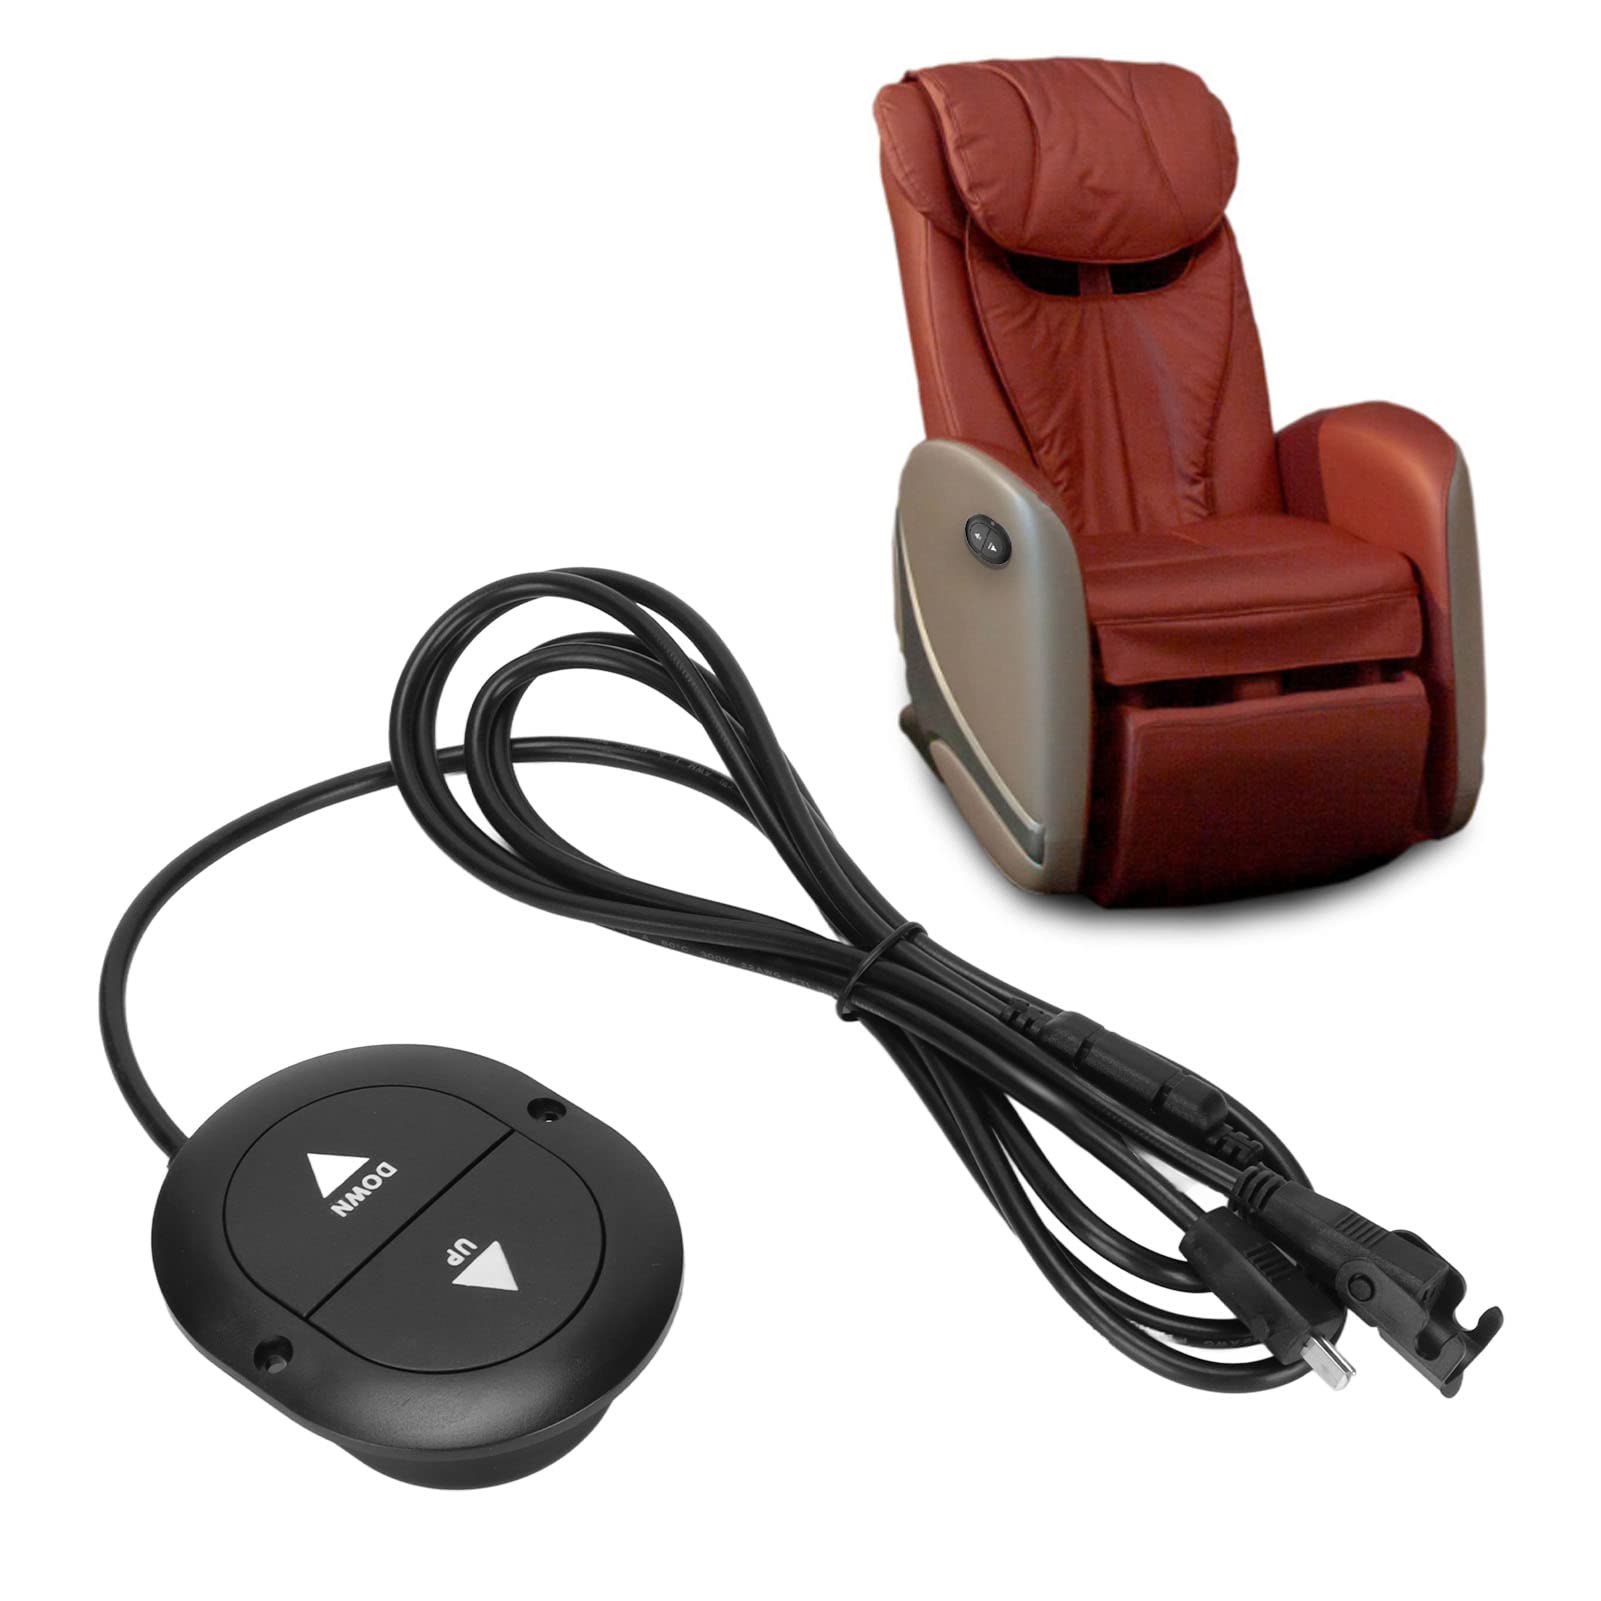 TOPINCN Power Recliner Control, Electric Chair Control with 2 Buttons Recliner Replacement Parts Recliner Hand Control Lift Chair Power Recliner